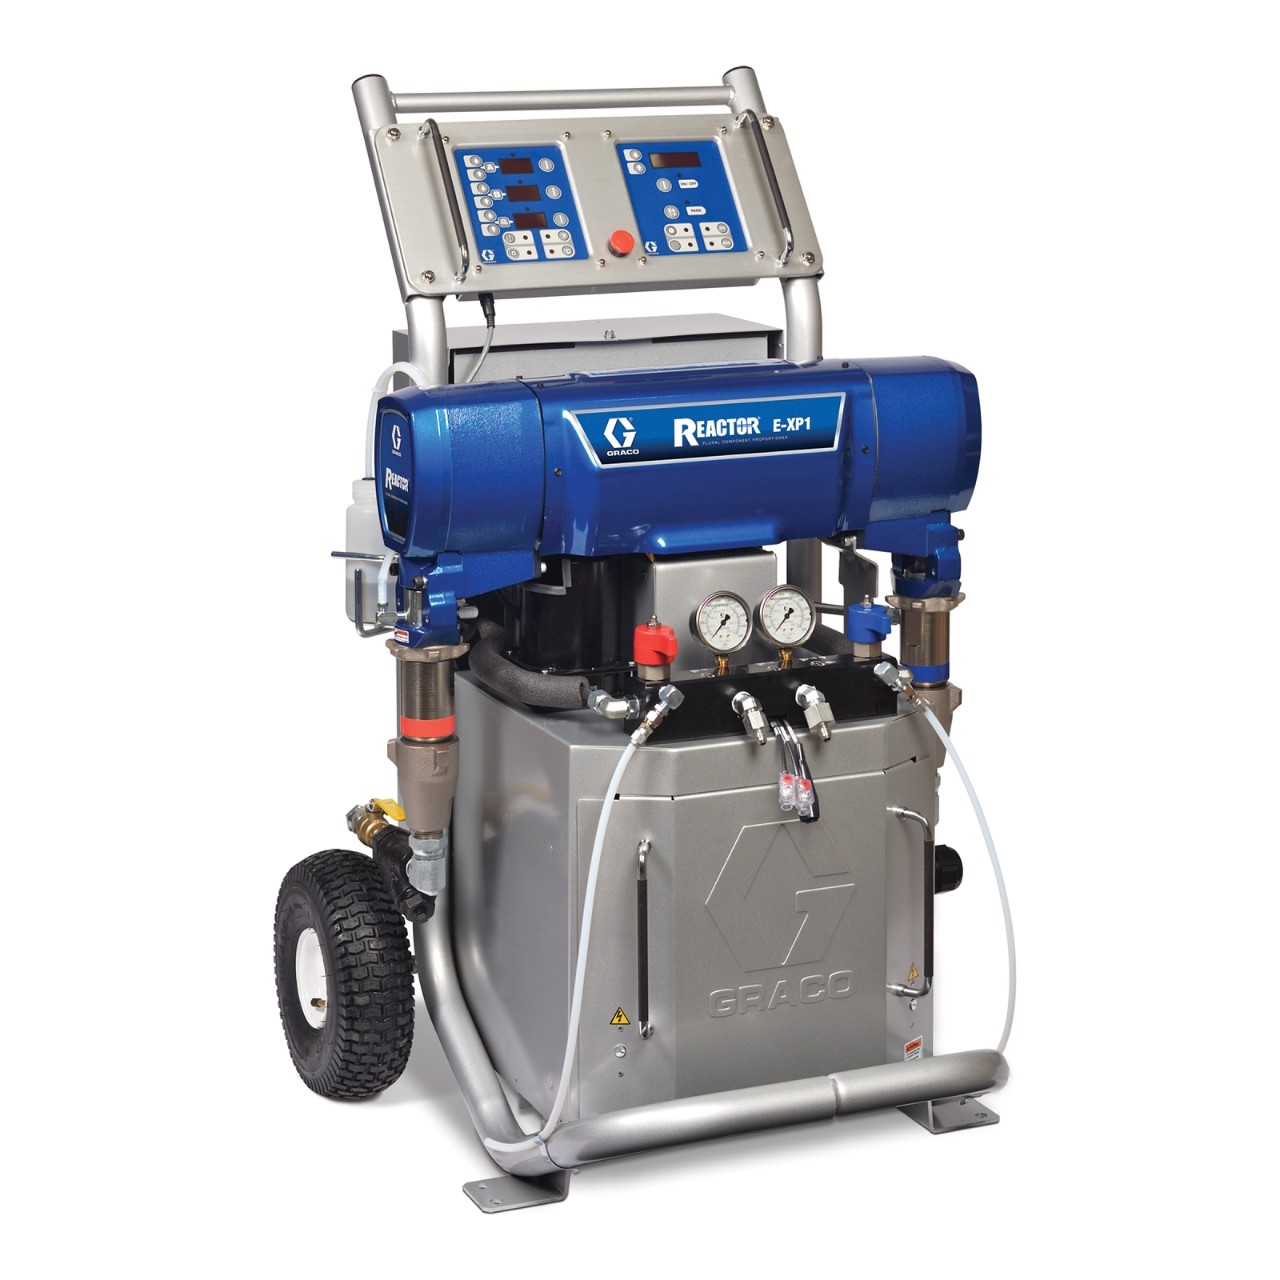 The Graco Reactor portable spray foam machine is a small, entry-level system with high performance features.